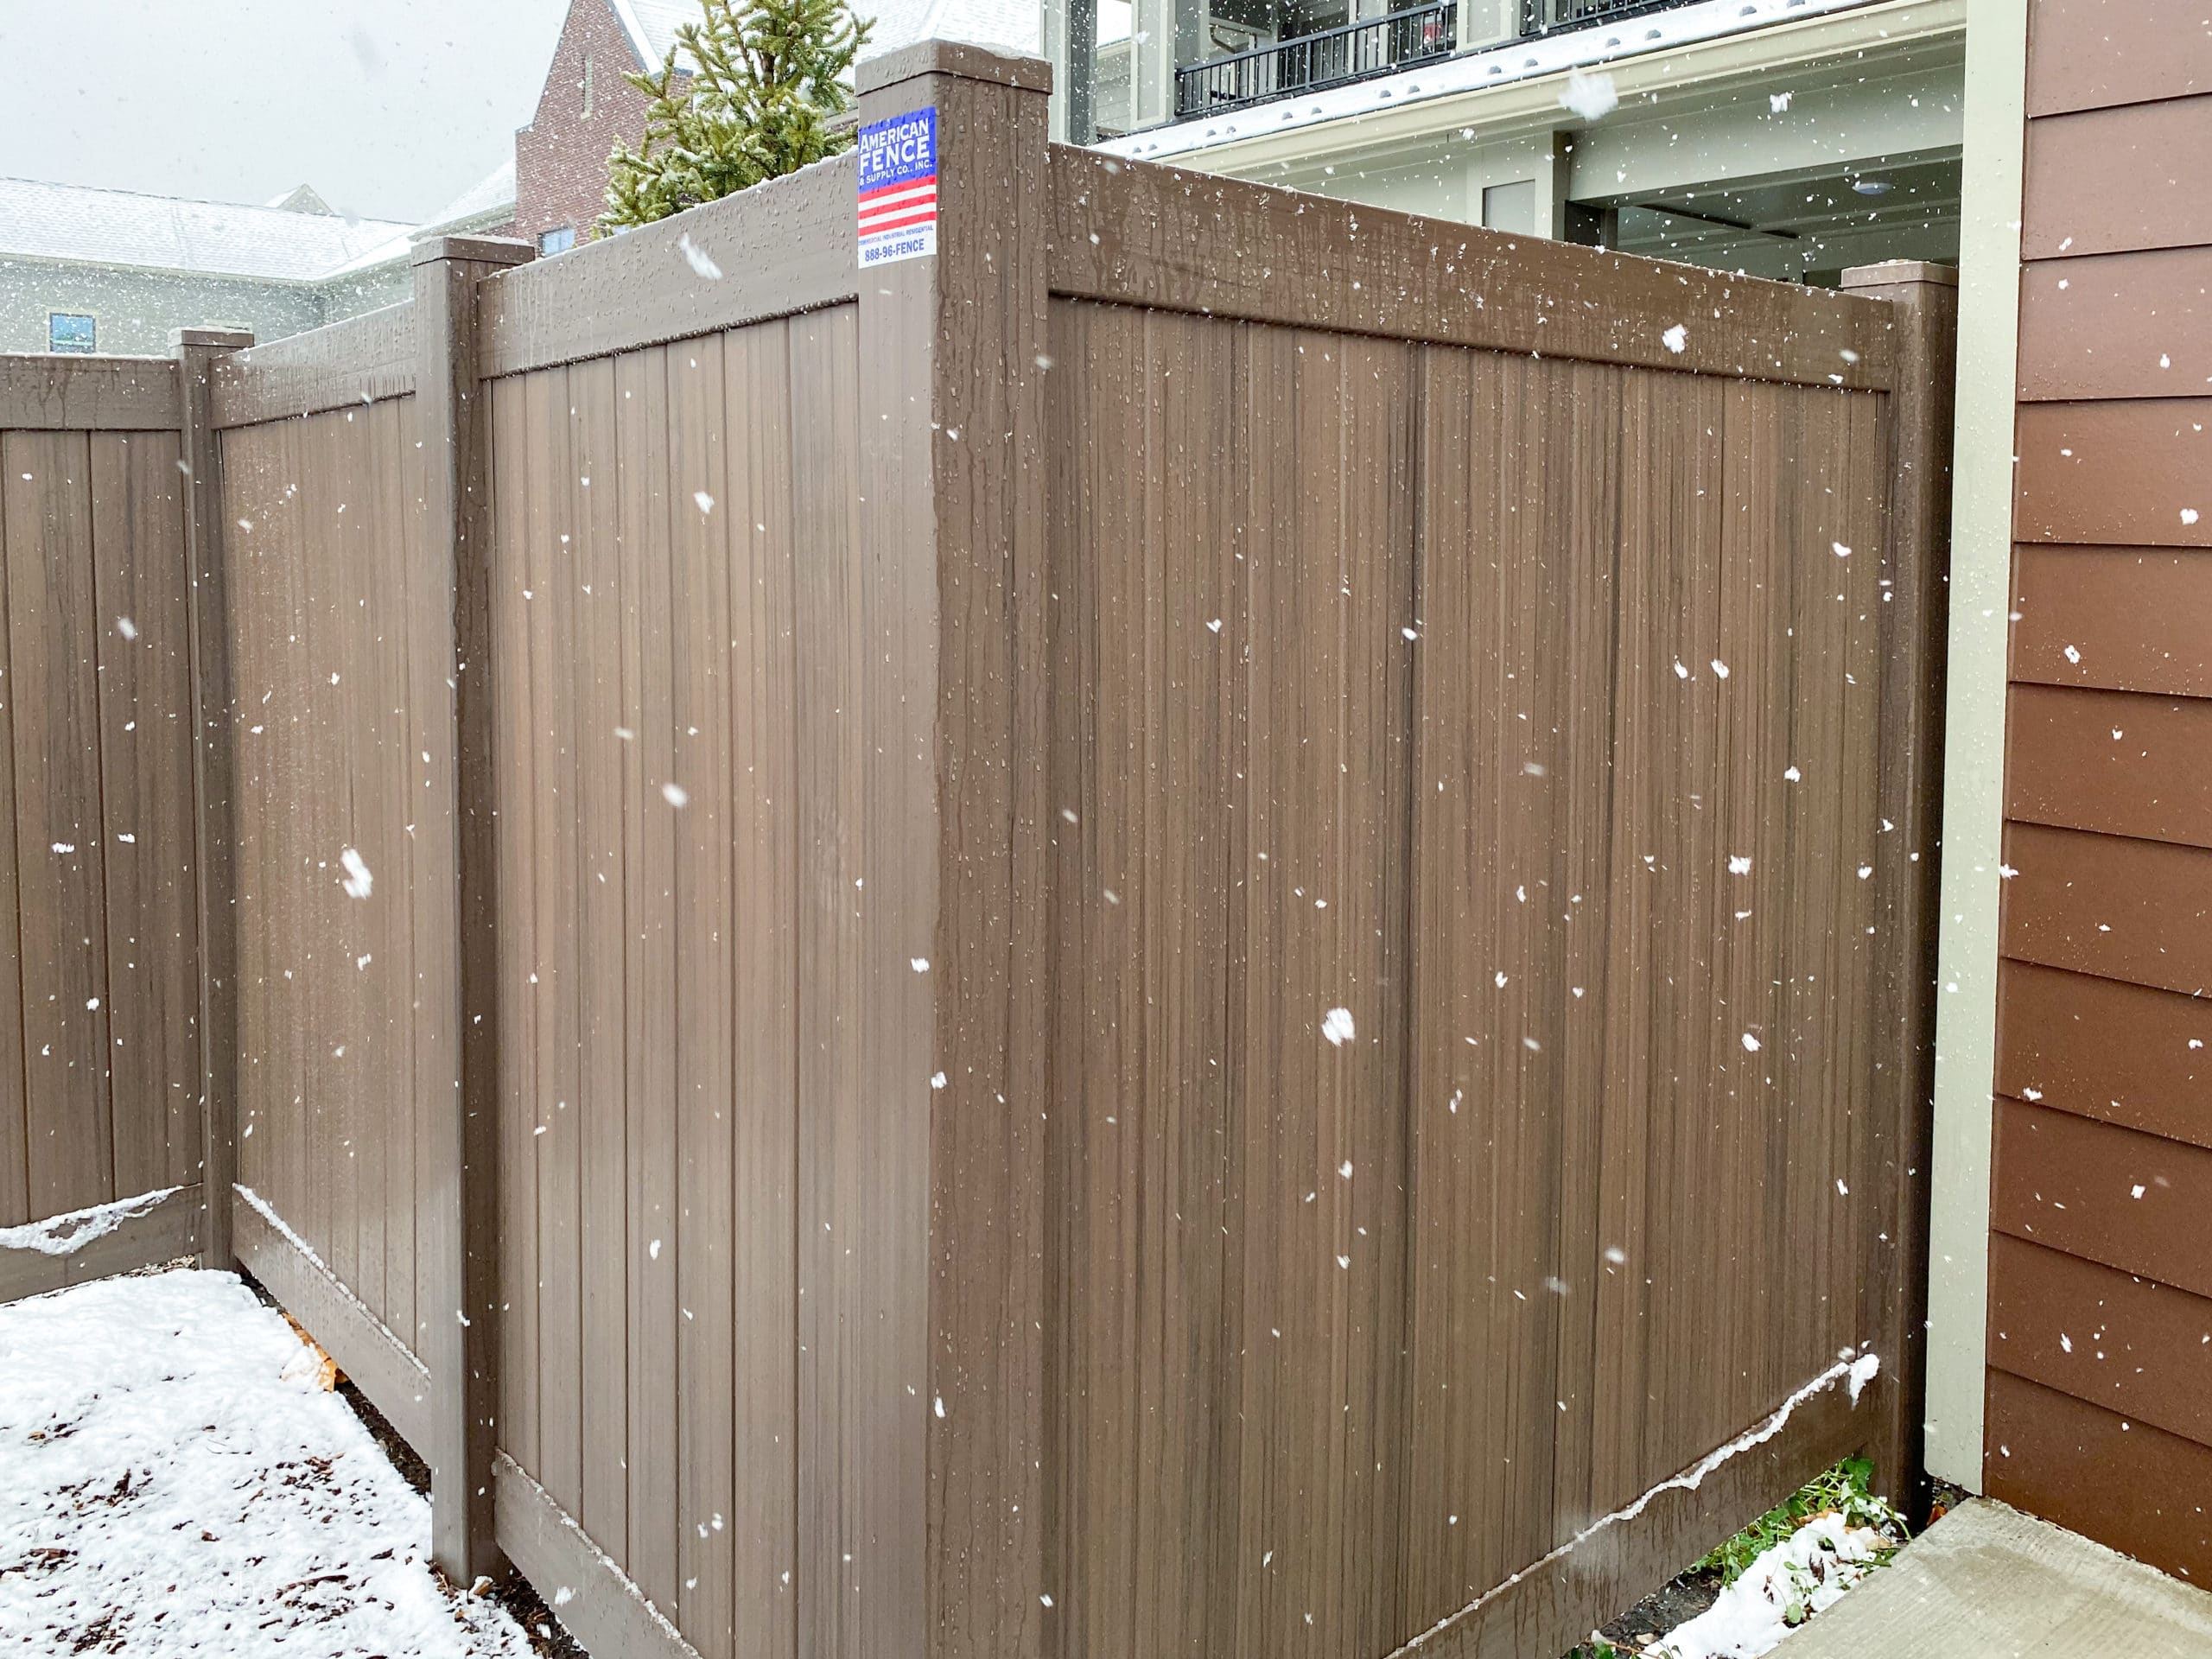 Image of commercial PVC / vinyl privacy fencing in Metro Detroit, Michigan